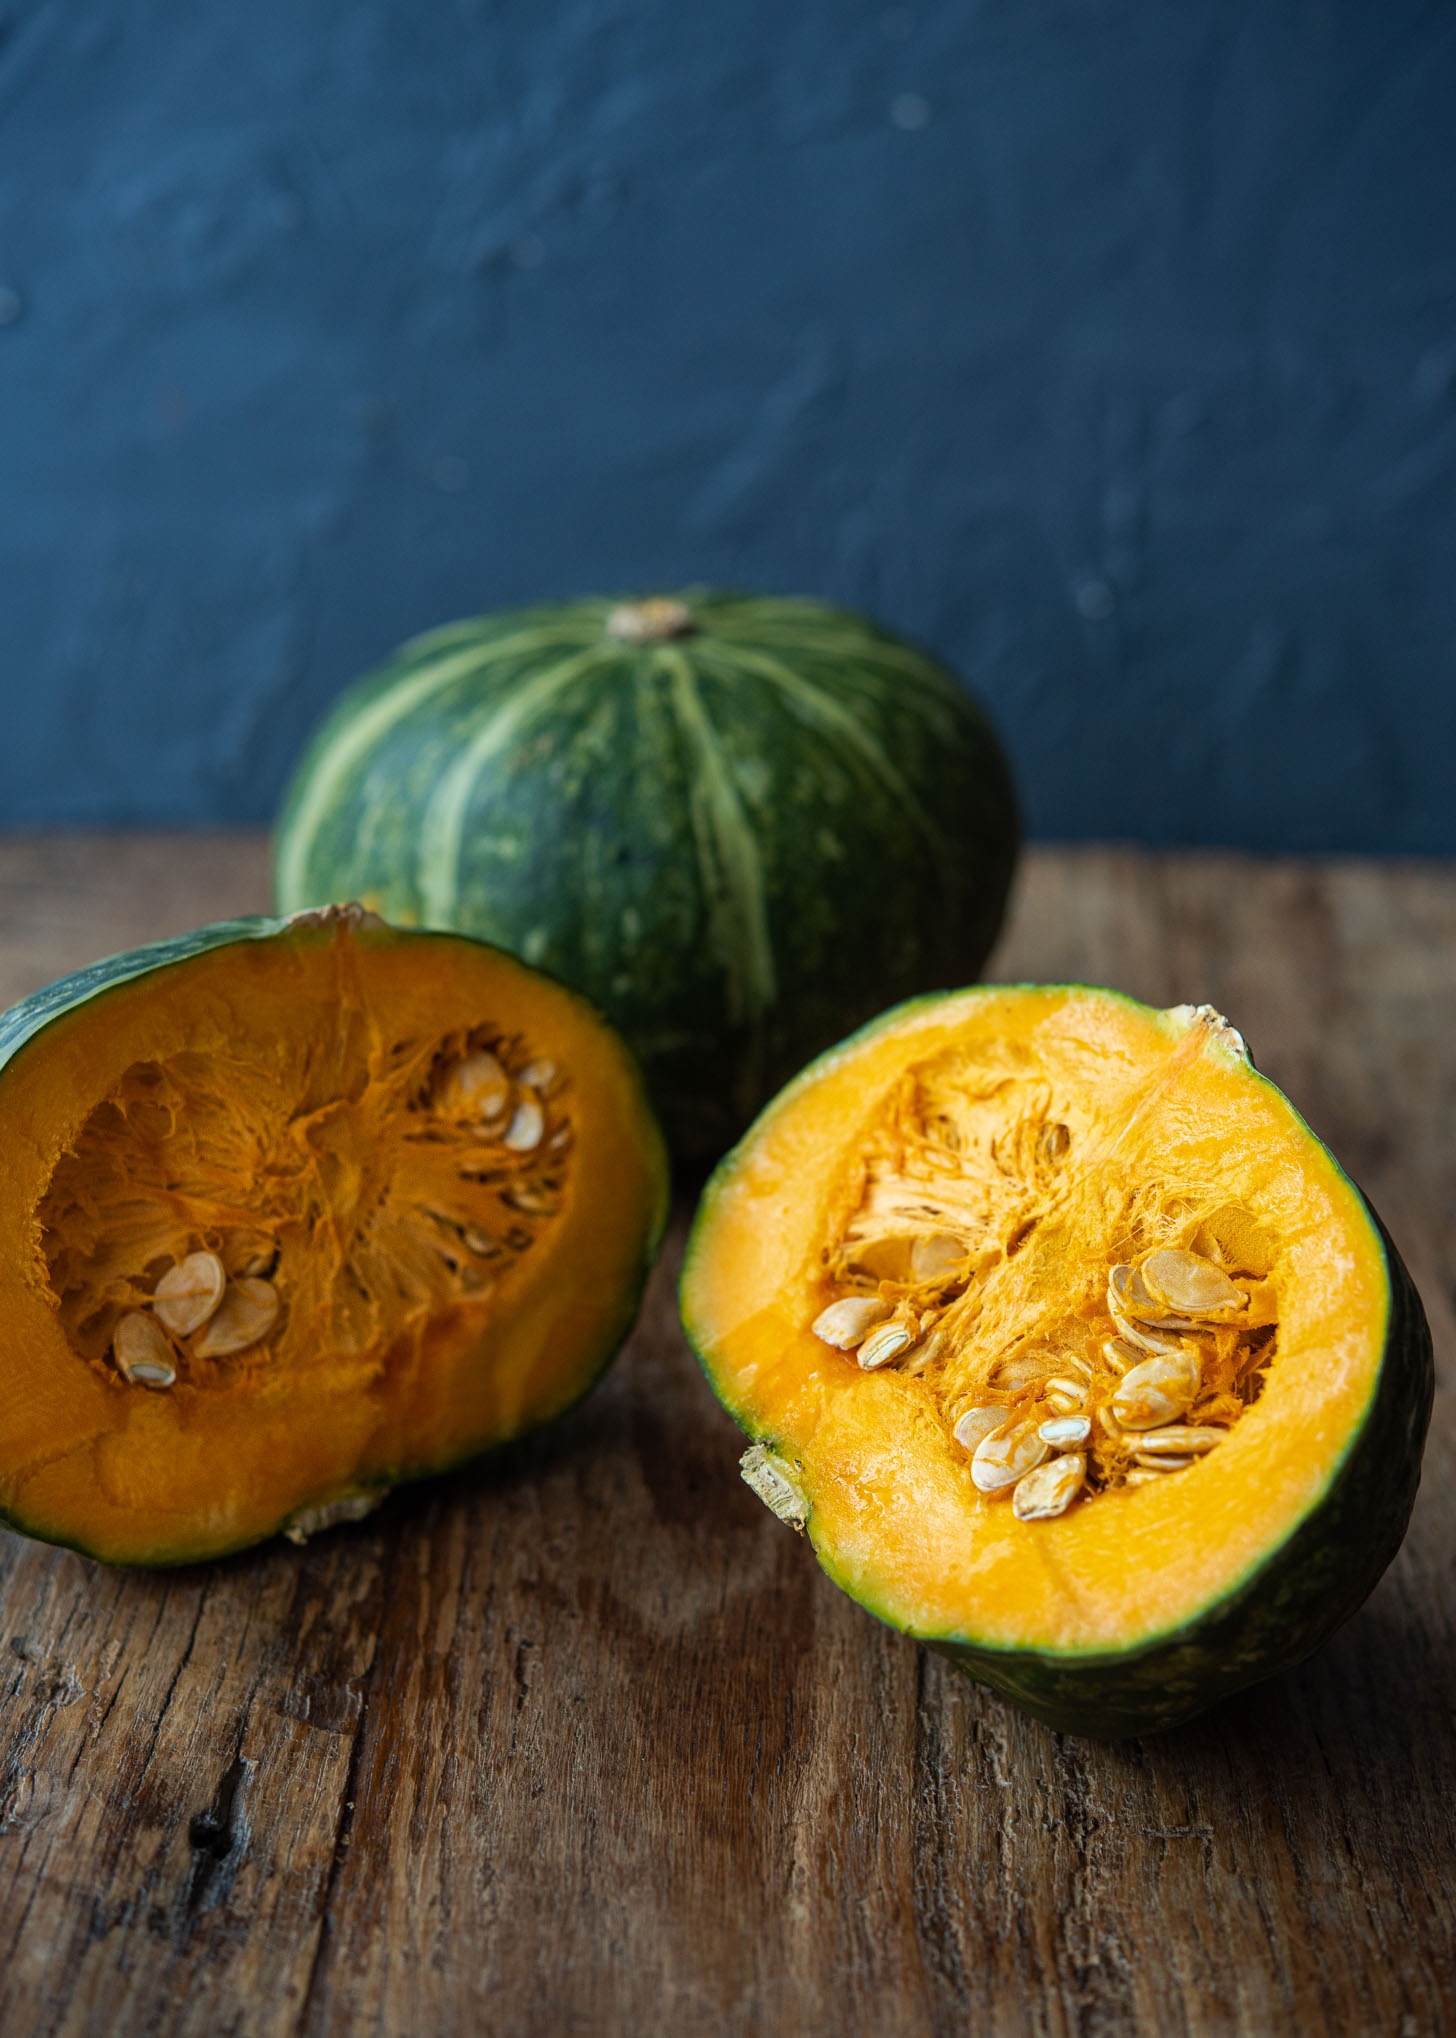 A Kabocha pumpkin is sliced in half and showing the seeds inside.